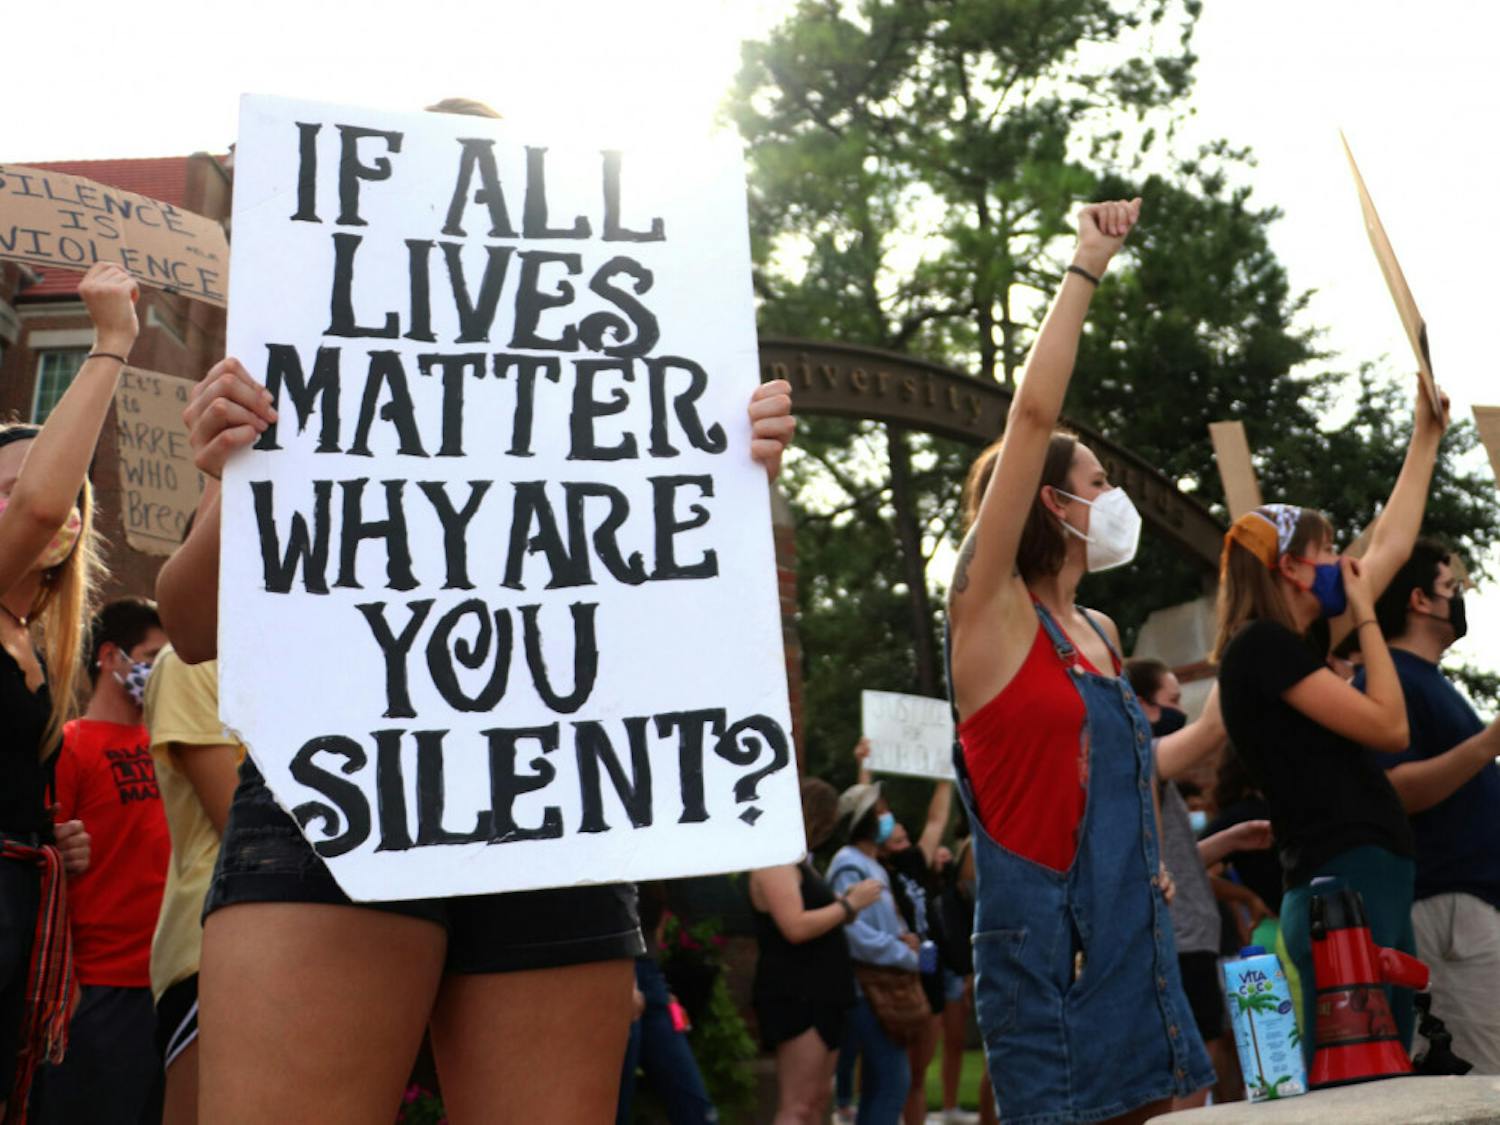 An “If all lives matter why are you silent” sign is held at the protest starting at Heavener of August 28, 2020, in Gainesville, Fla.